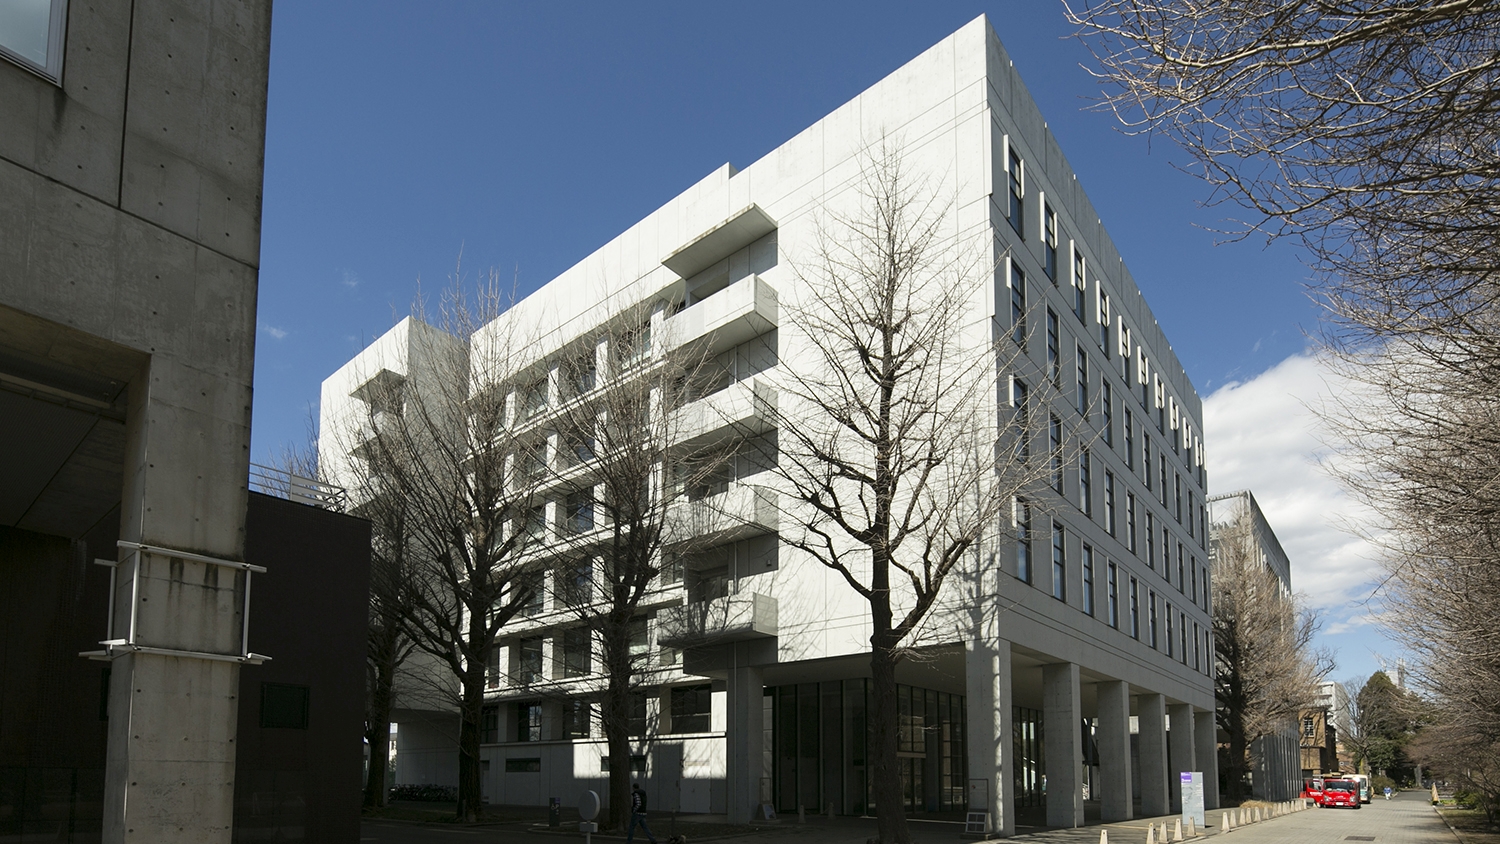 South building 3, the home of the Academic-Industrial Joint Laboratory for Renewable Energy